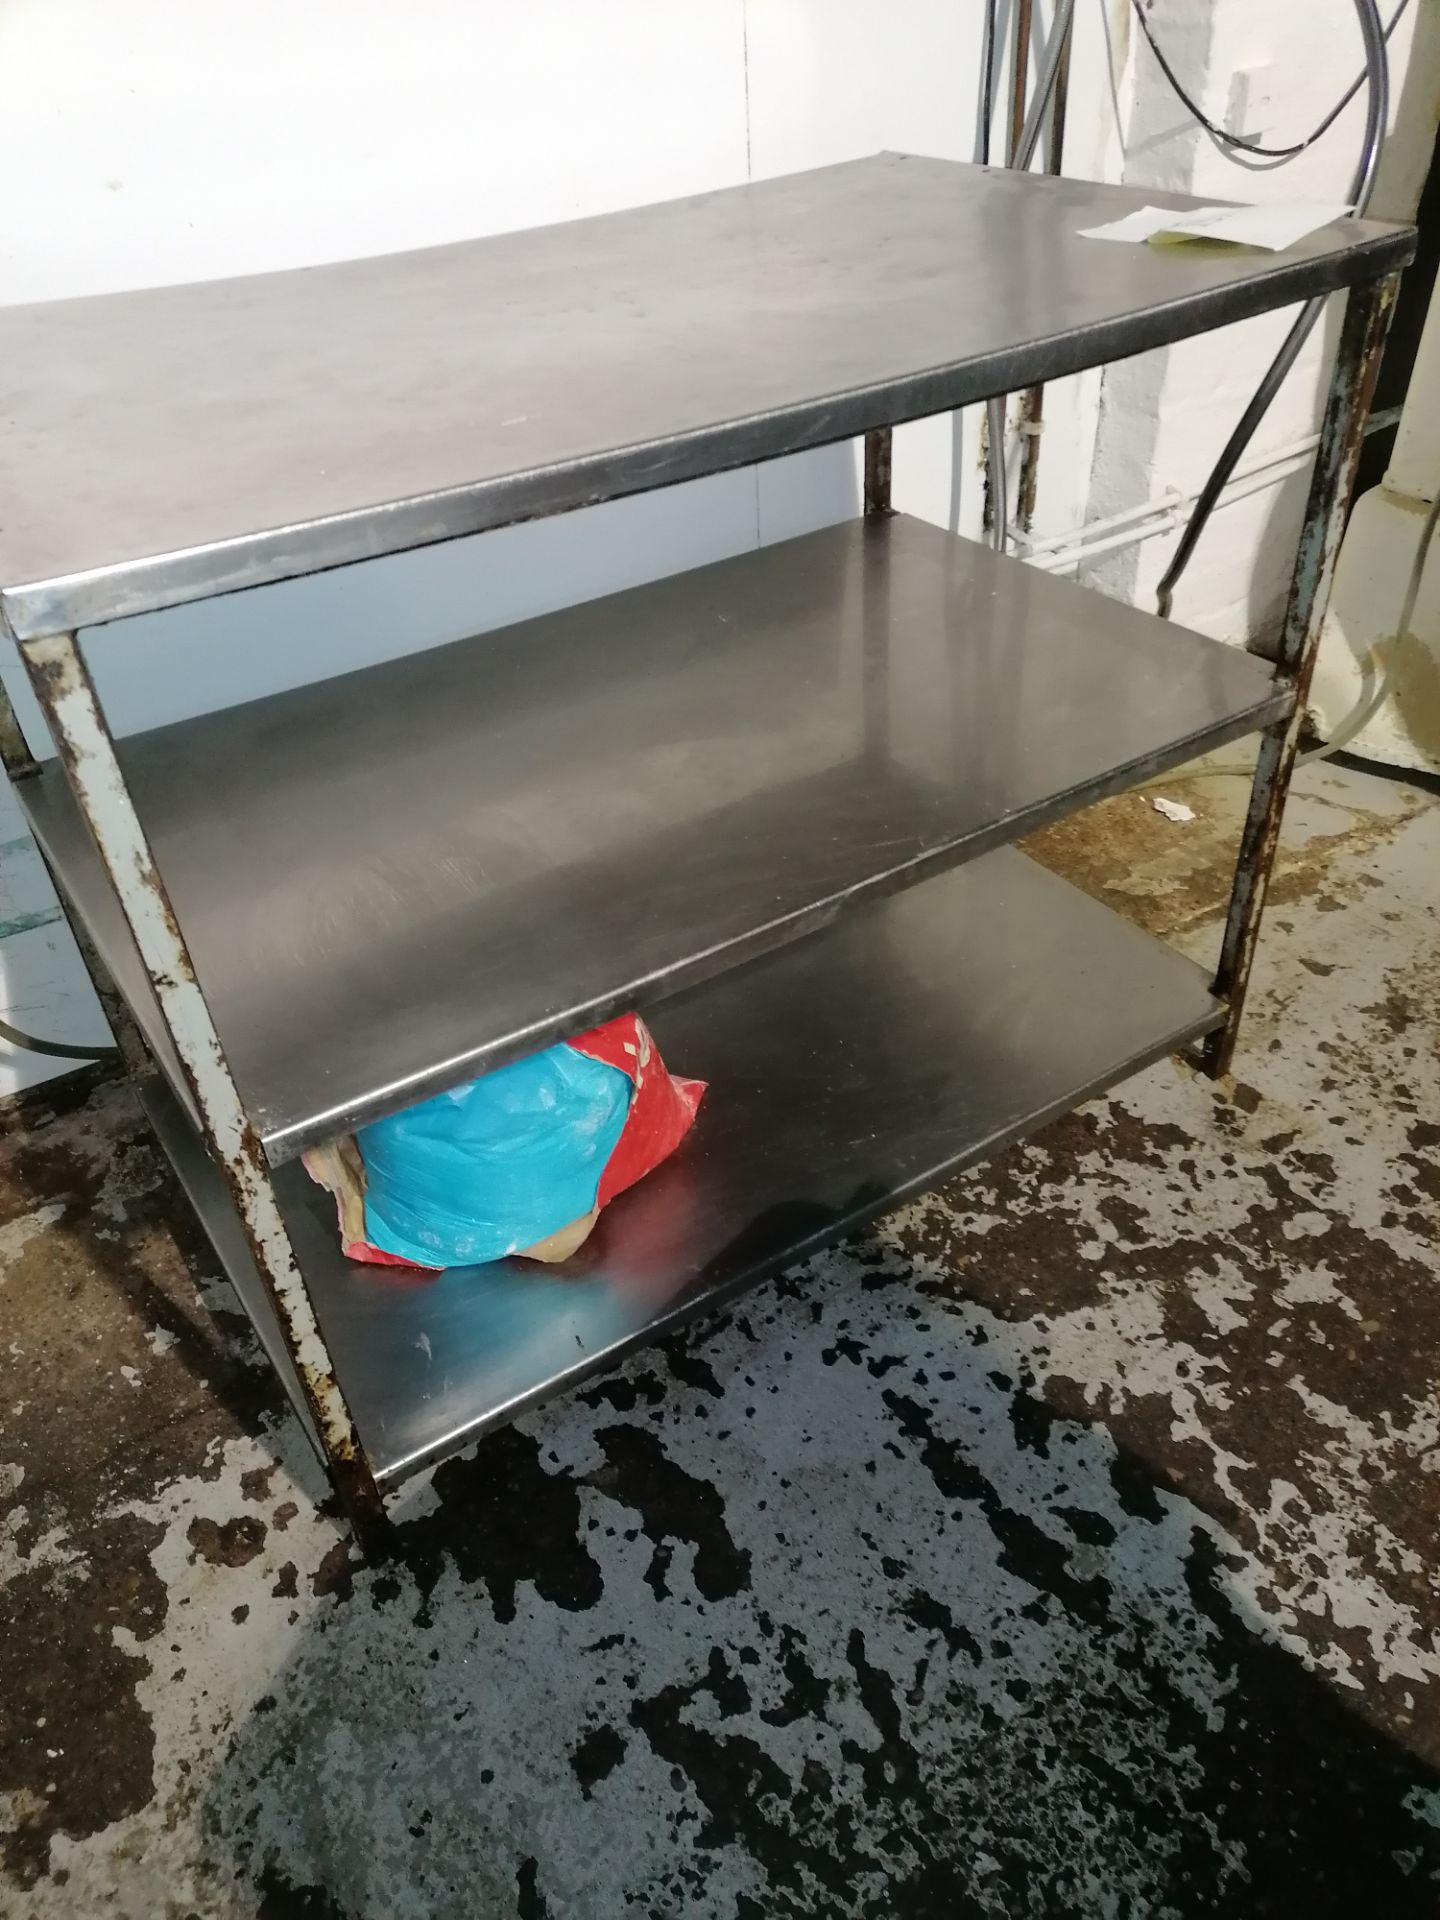 Stainless Steel Preperation Table With Steel Frame Length 107cm Width 66cm Height 88cm Contents - Image 3 of 5